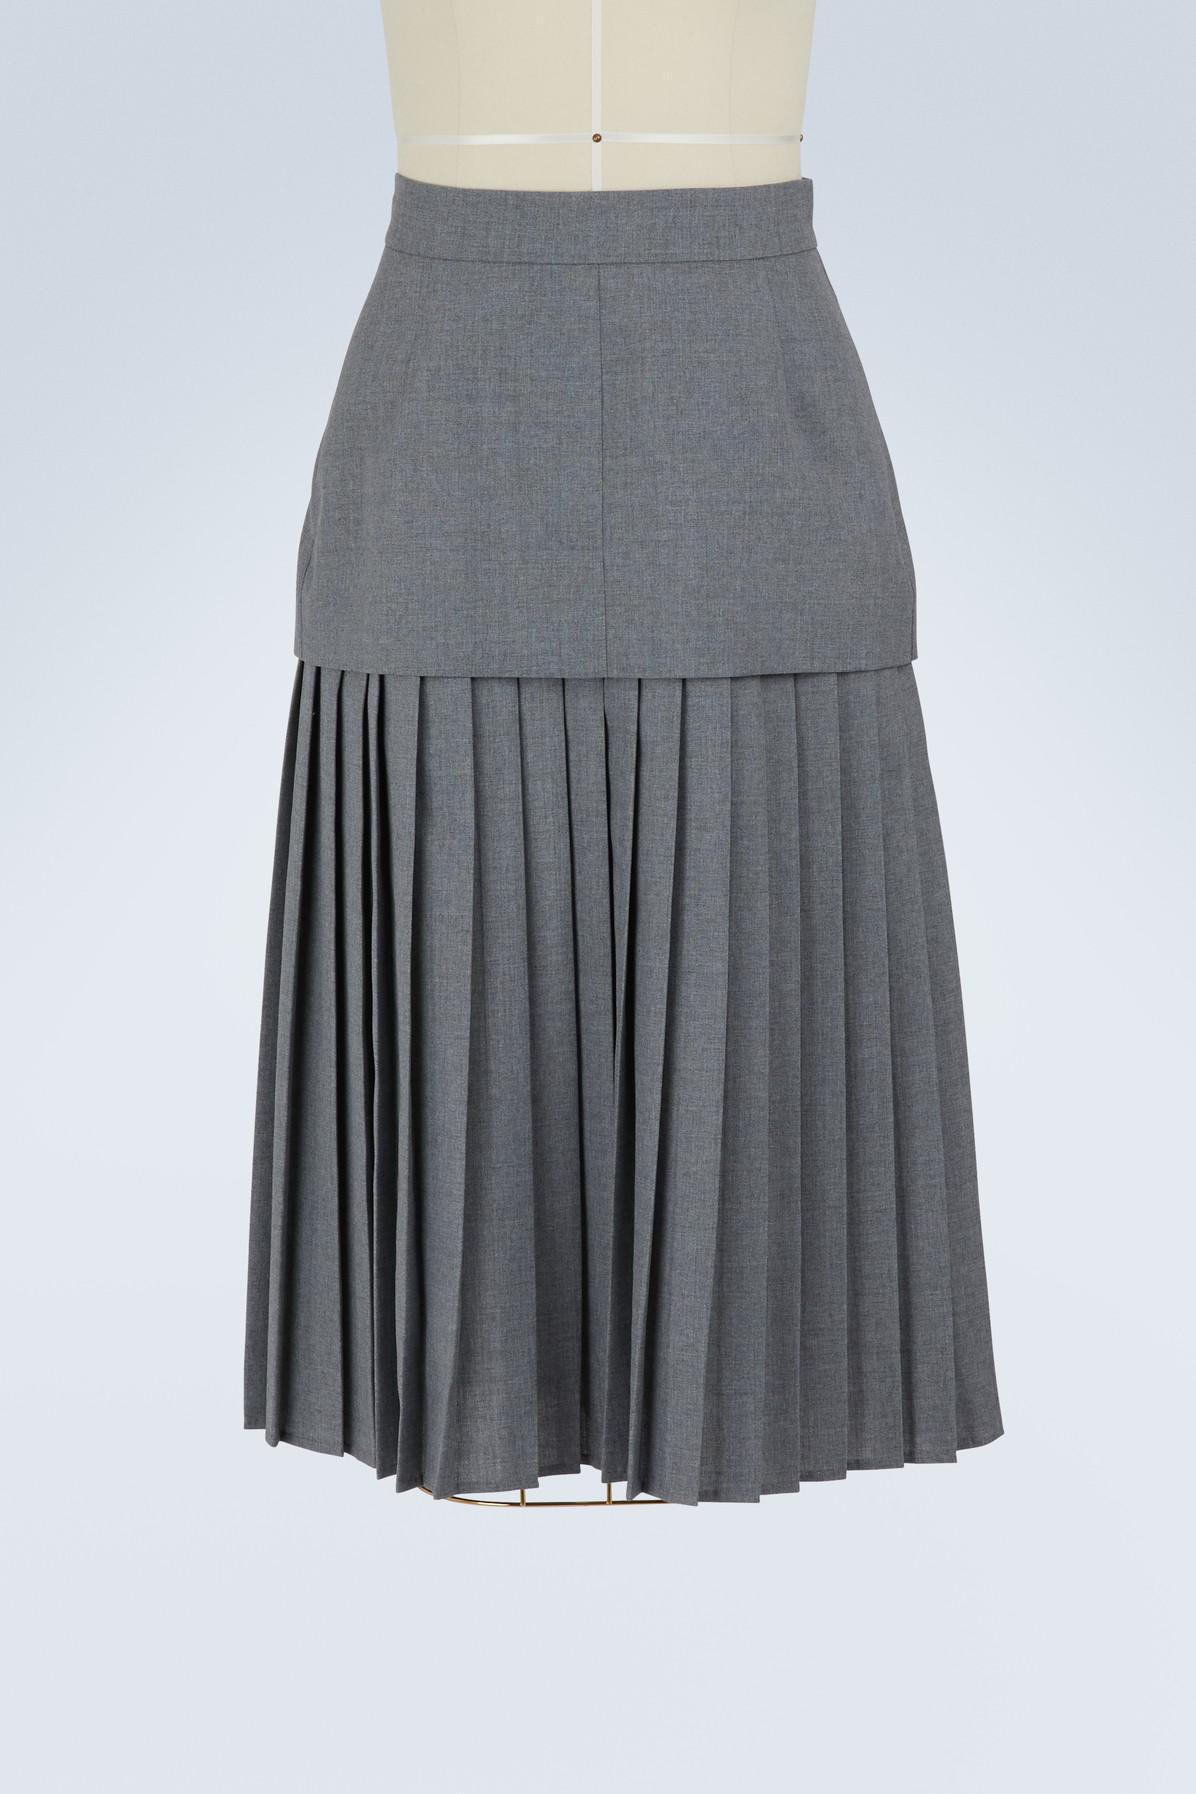 Thom Browne Wool Pleated Skirt in Gray - Lyst